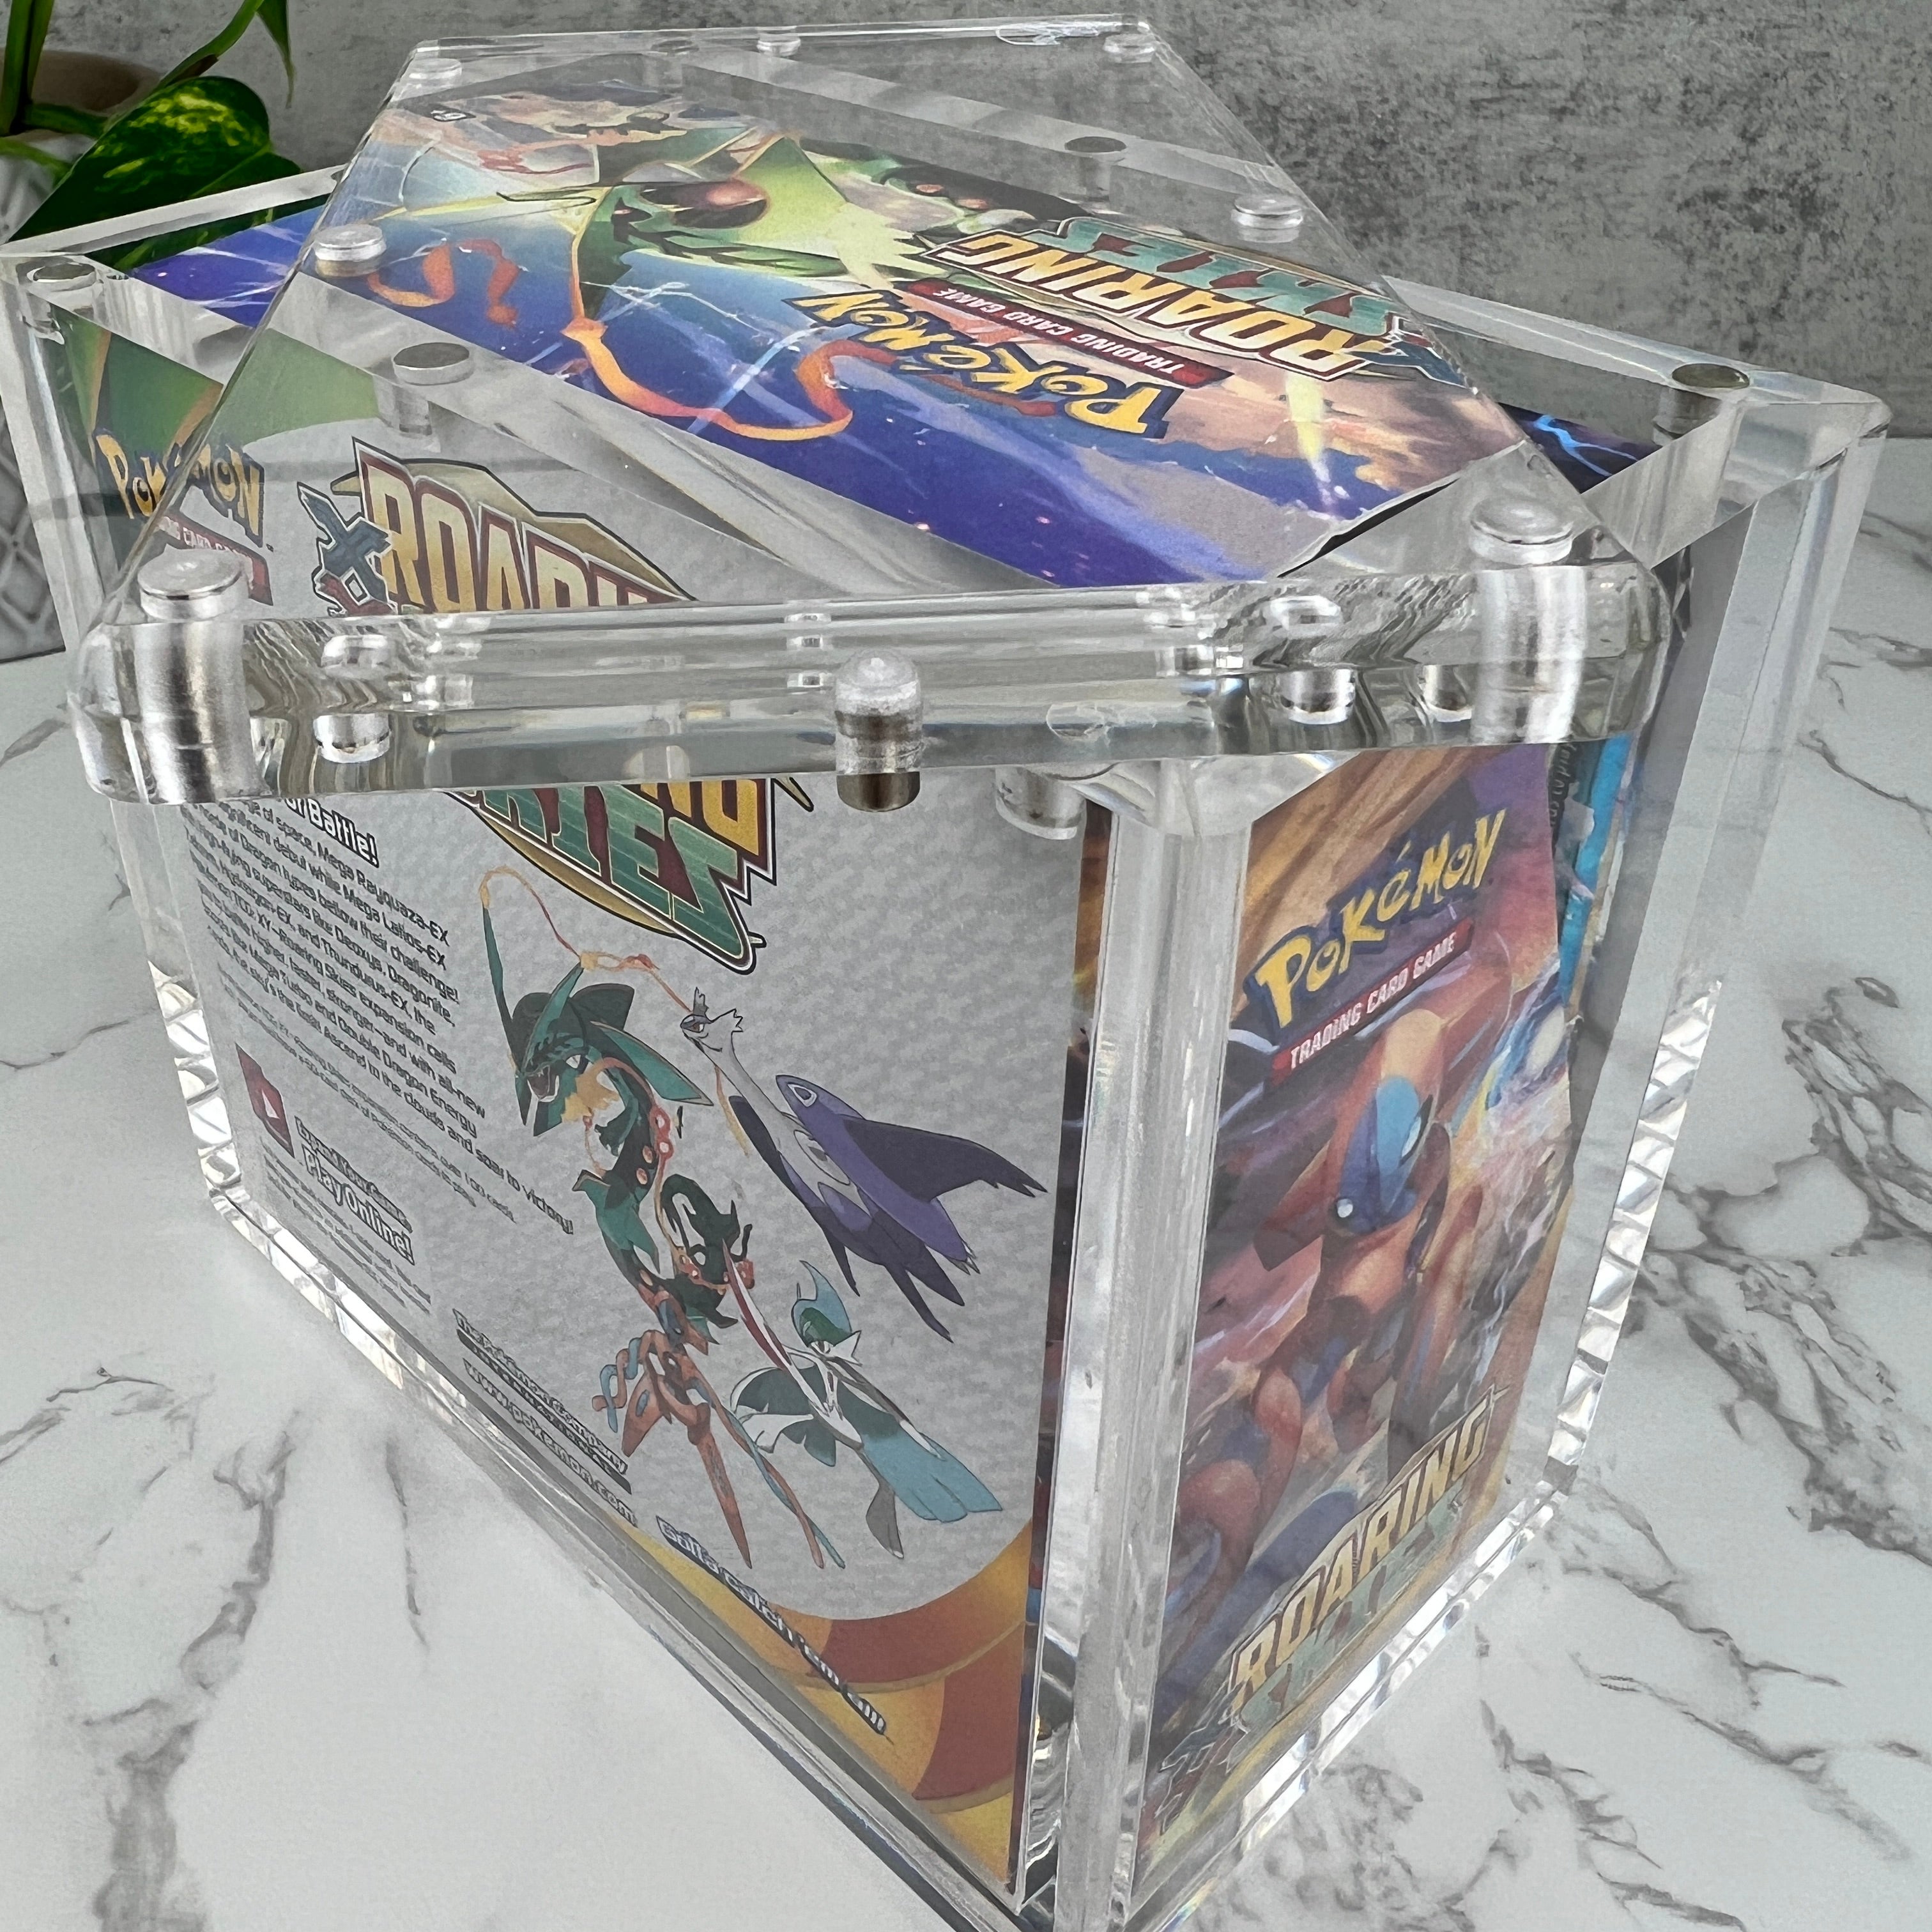 Pokemon Modern Booster Box magnetic acrylic protective case. Crystal clear acrylic, with UV resistance. Fits Diamond & Pearl, Platinum, HeartGold SoulSilver, Black & White, and XY Series